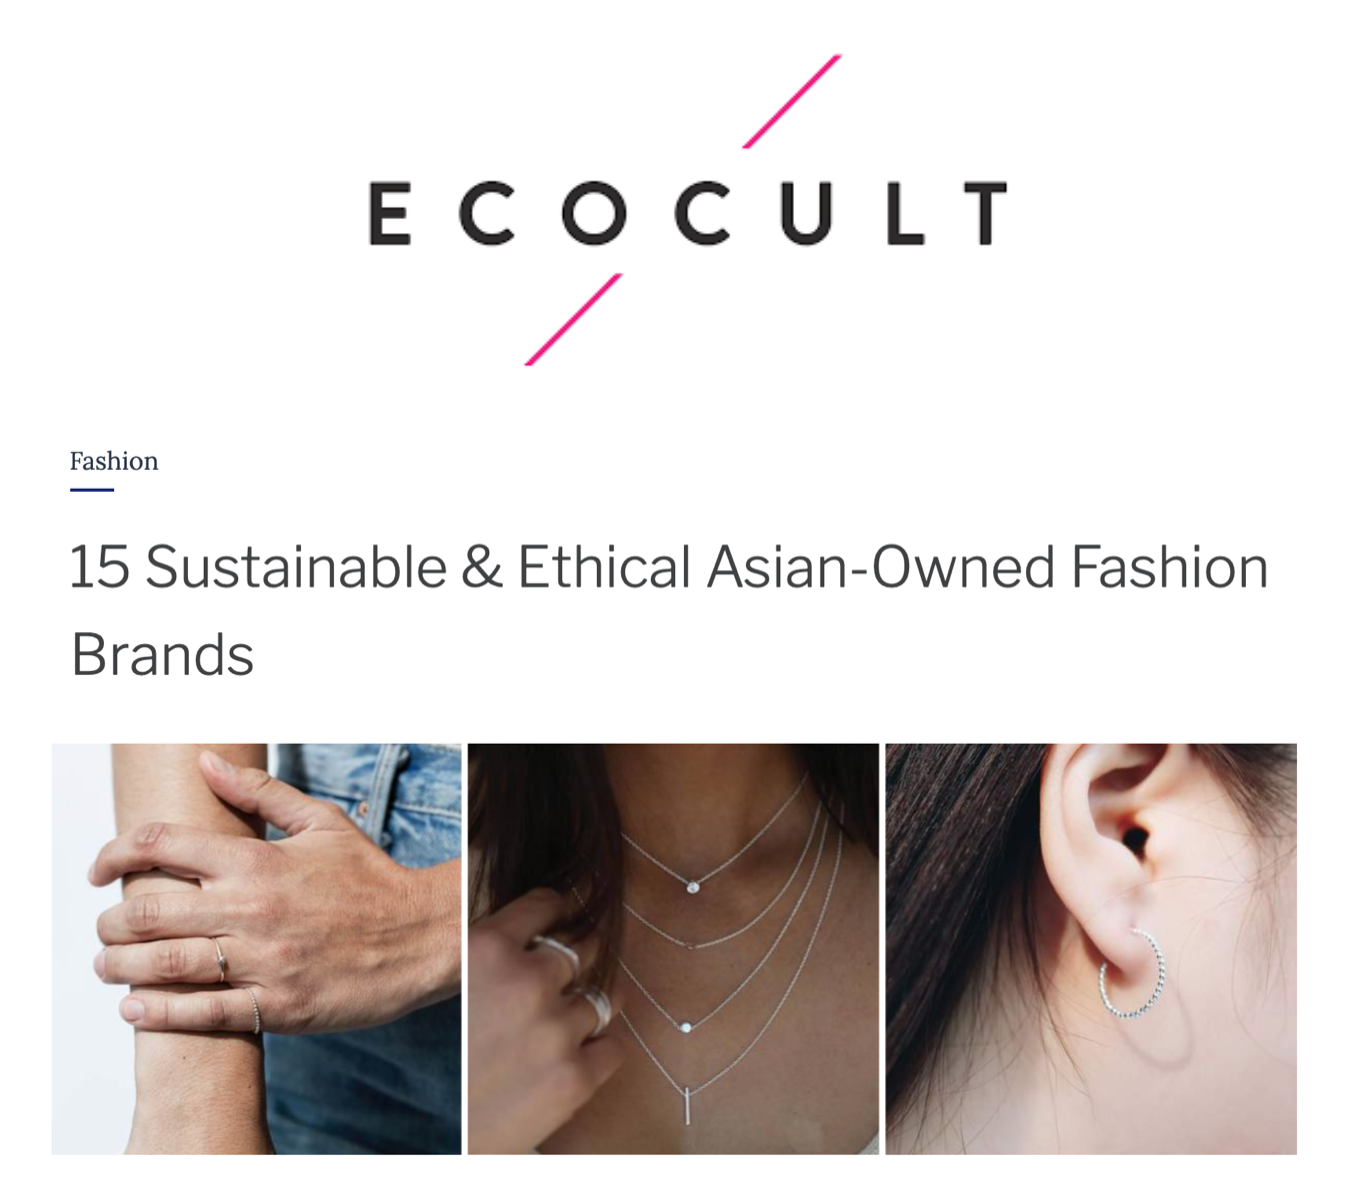 Boma Jewelry - Eco Cult - AAPI brands.png